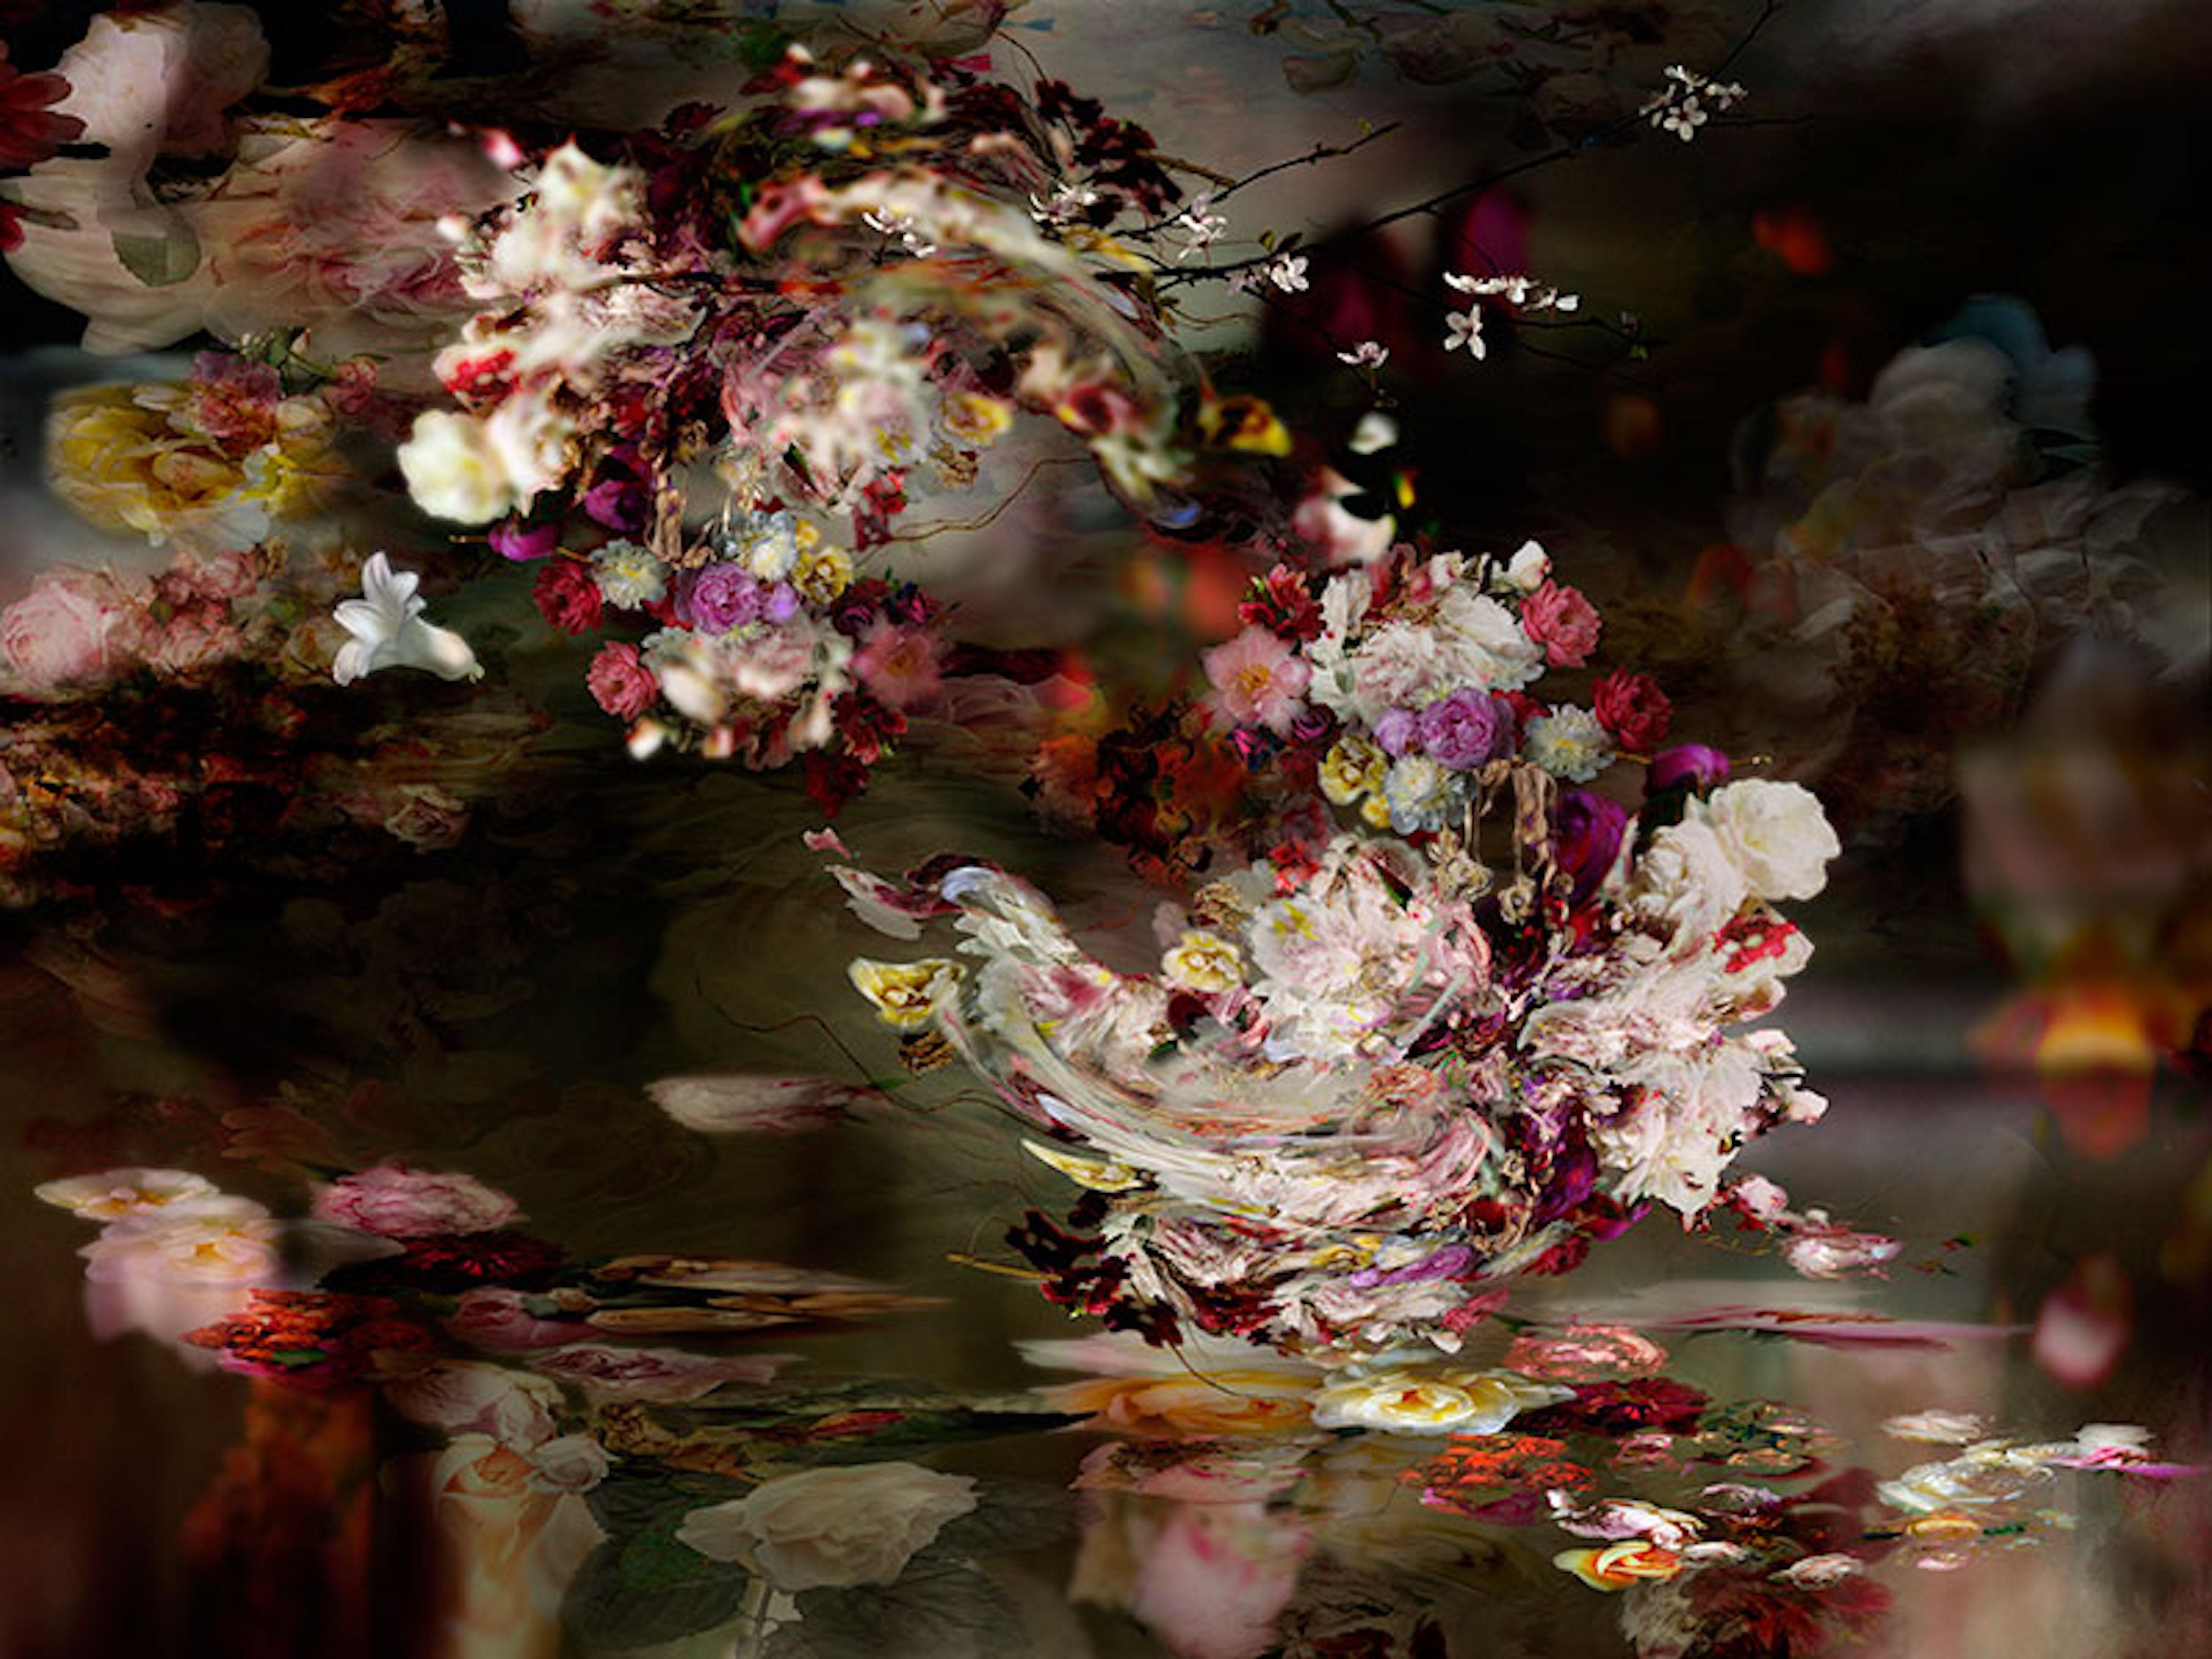 Isabelle Menin Still-Life Photograph - River 6 - Floral still life colorful dark red white contemporary photograph